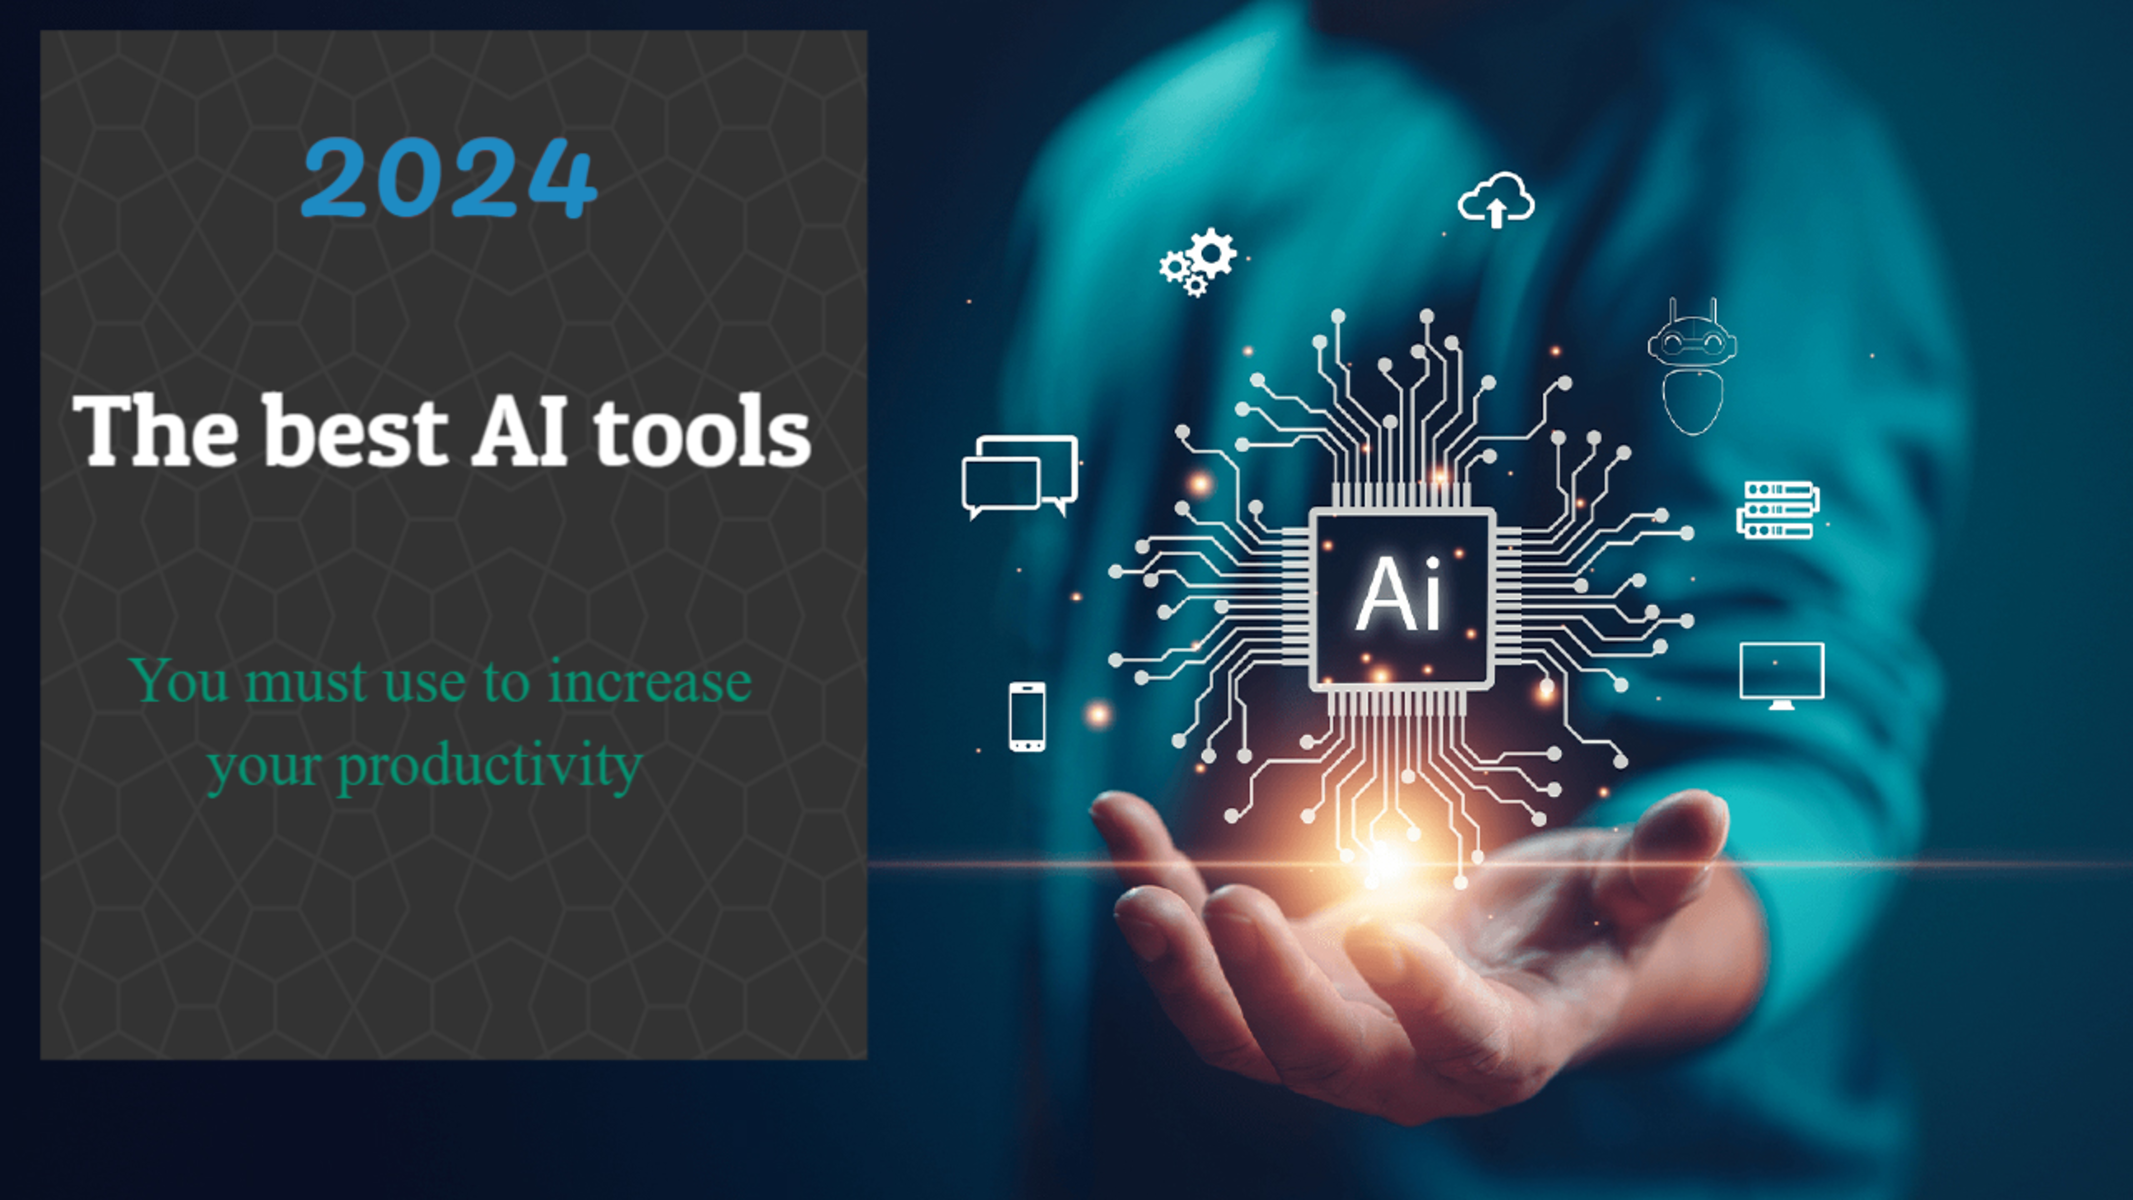 The best AI tools that you must use to increase your productivity in 2024